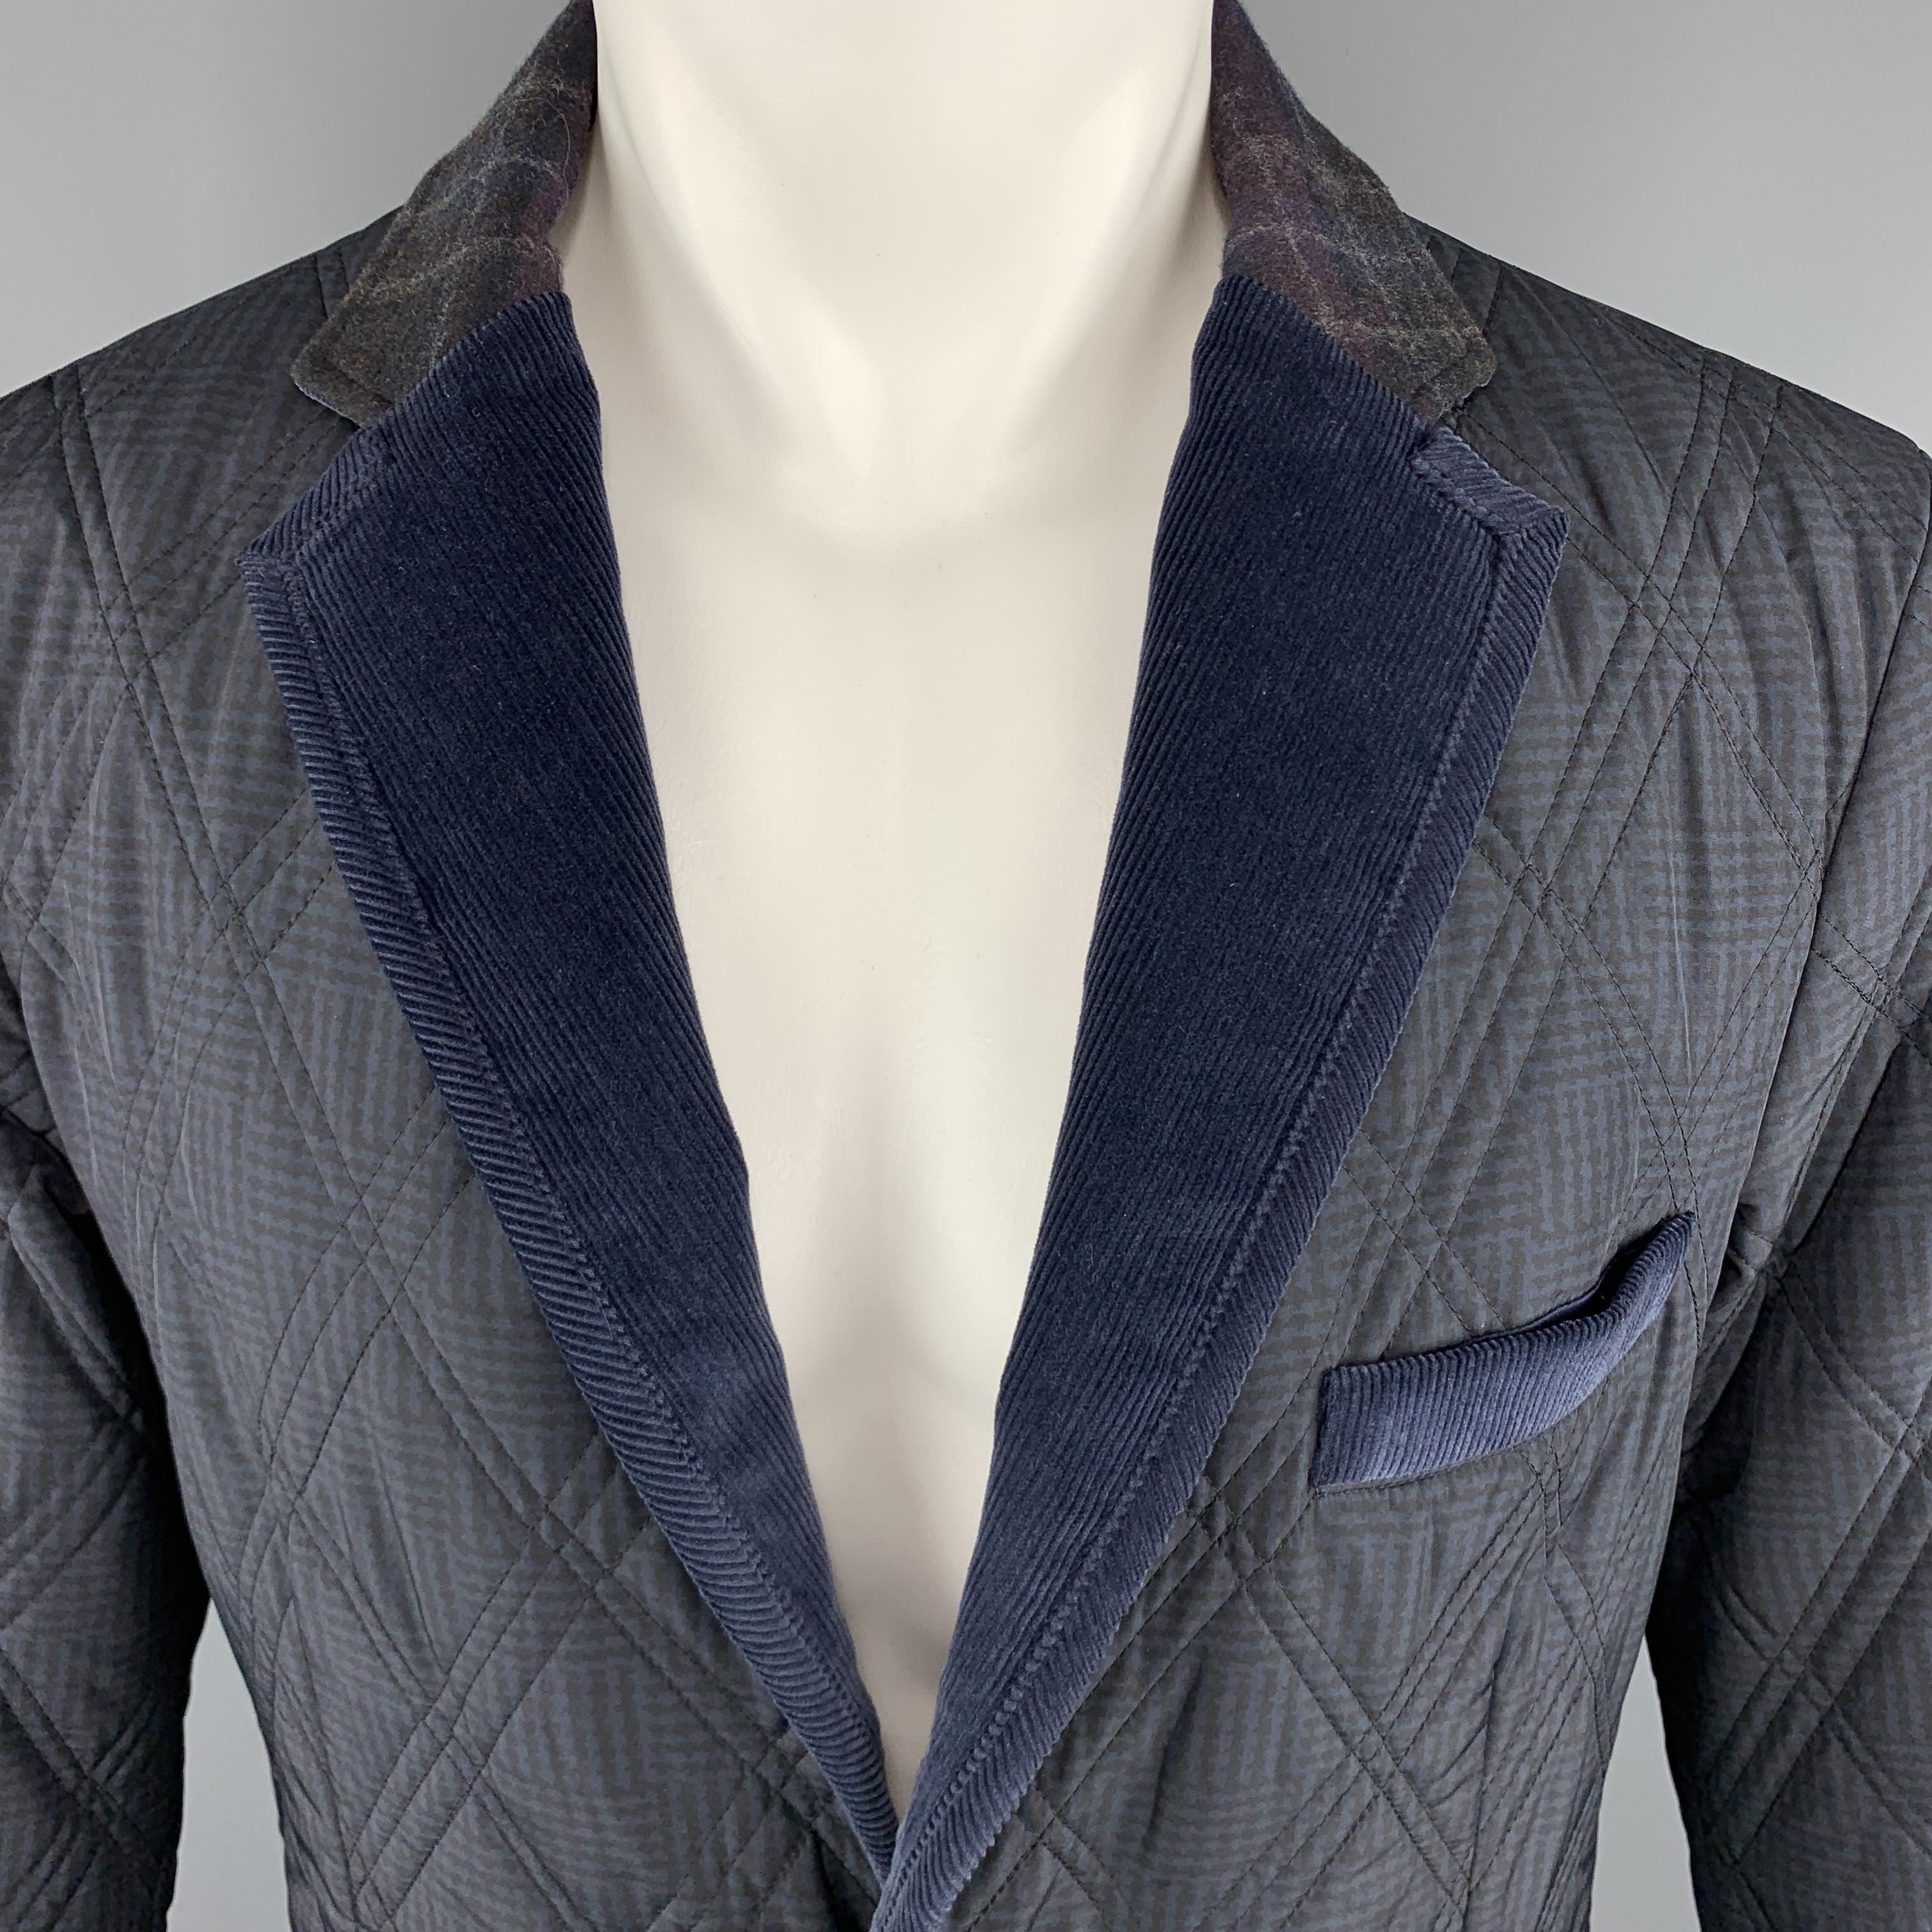 ETRO Jacket comes in navy tones in a quilted nylon and corduroy materials, with a notch lapel, slit and flap pockets, elbow patches, two buttons at closure, single breasted, buttoned cuffs and a double vent at back. Made in Italy.

Excellent